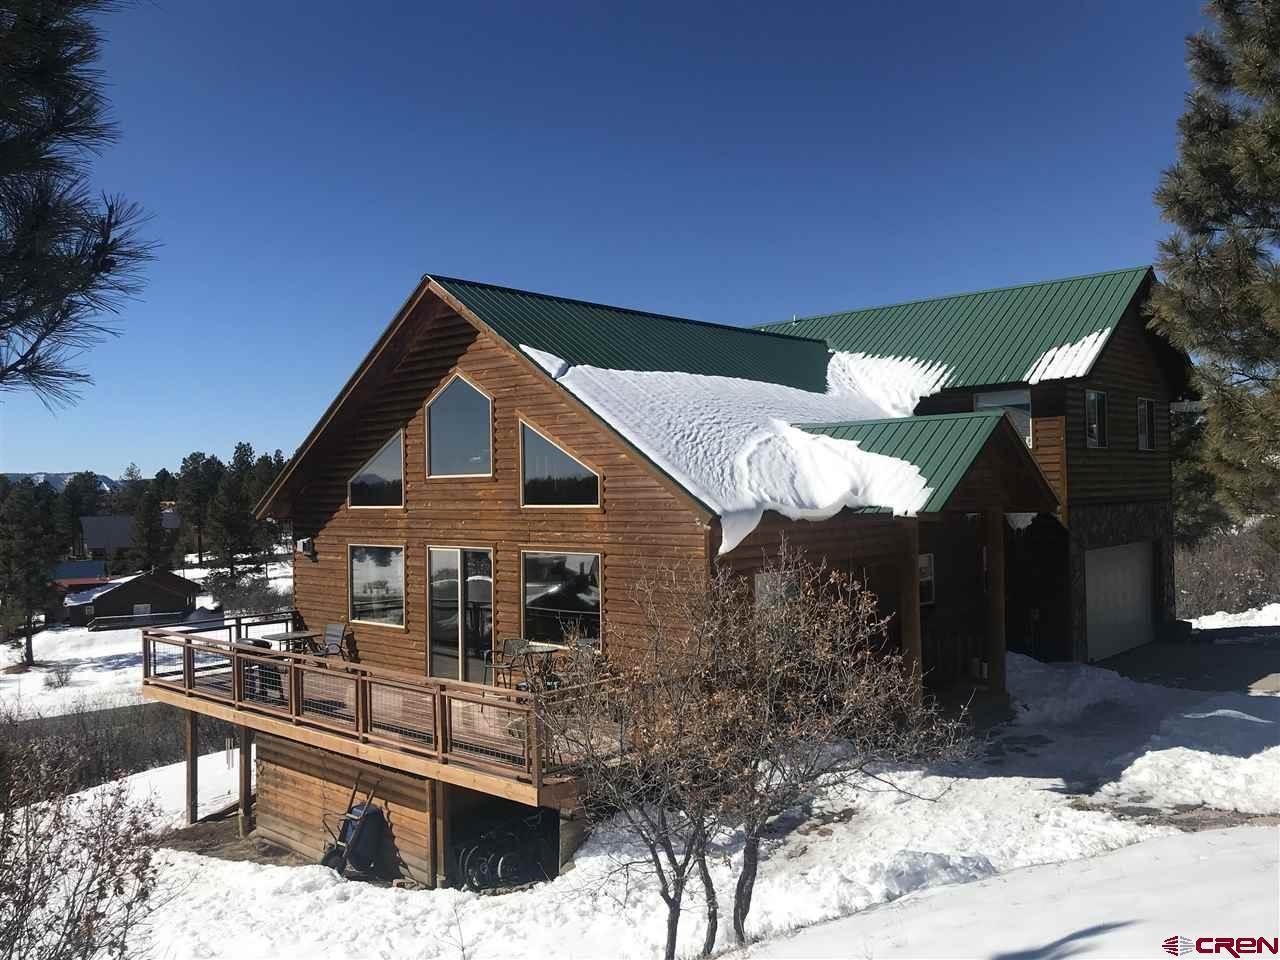 57 Chestnut Court, Pagosa Springs, CO 81147